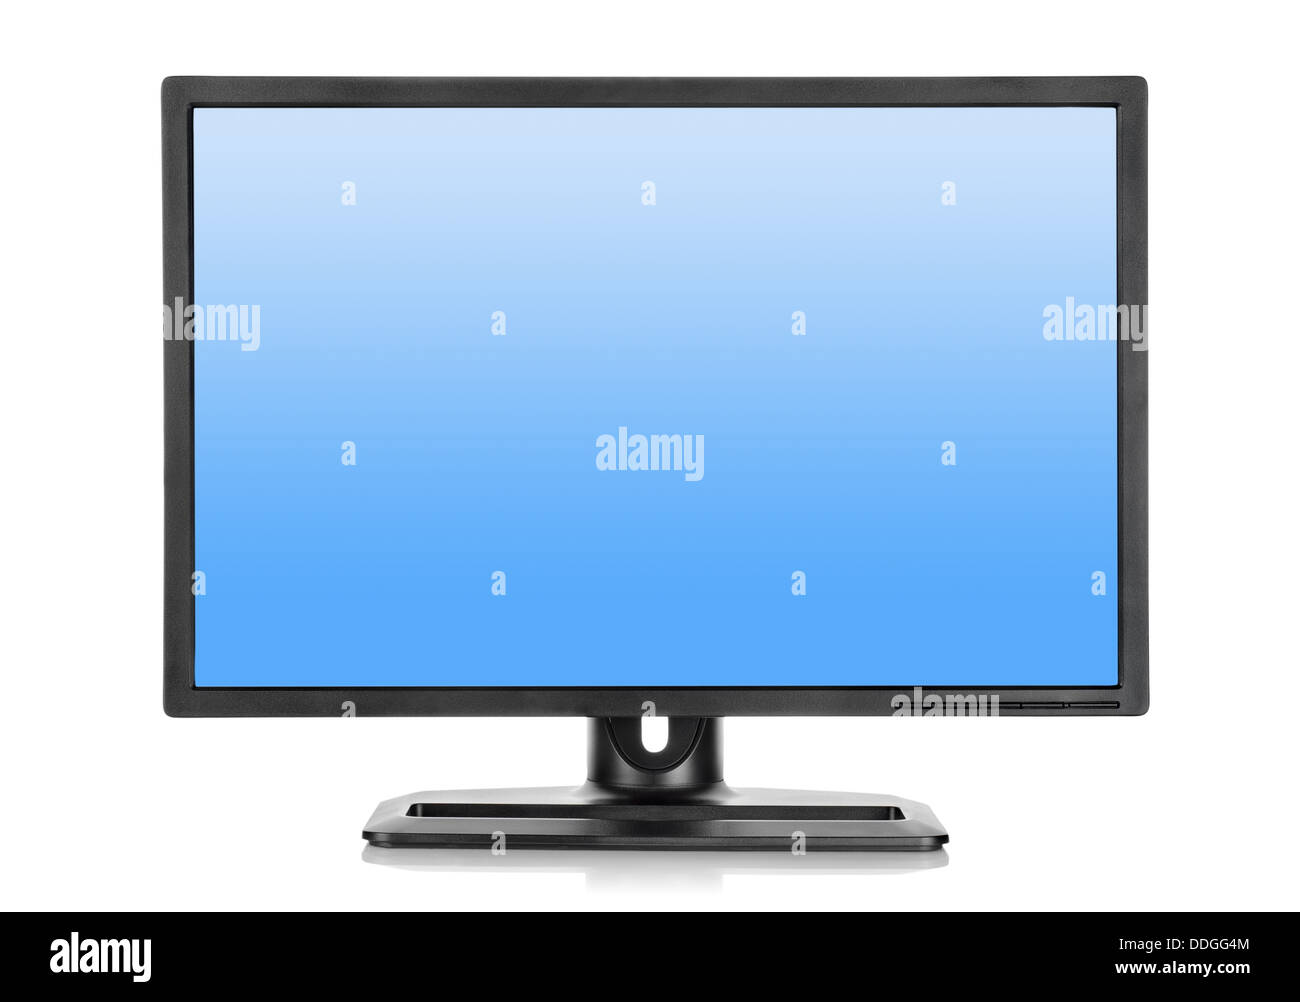 Liquid-crystal display on a white background Stock Photo